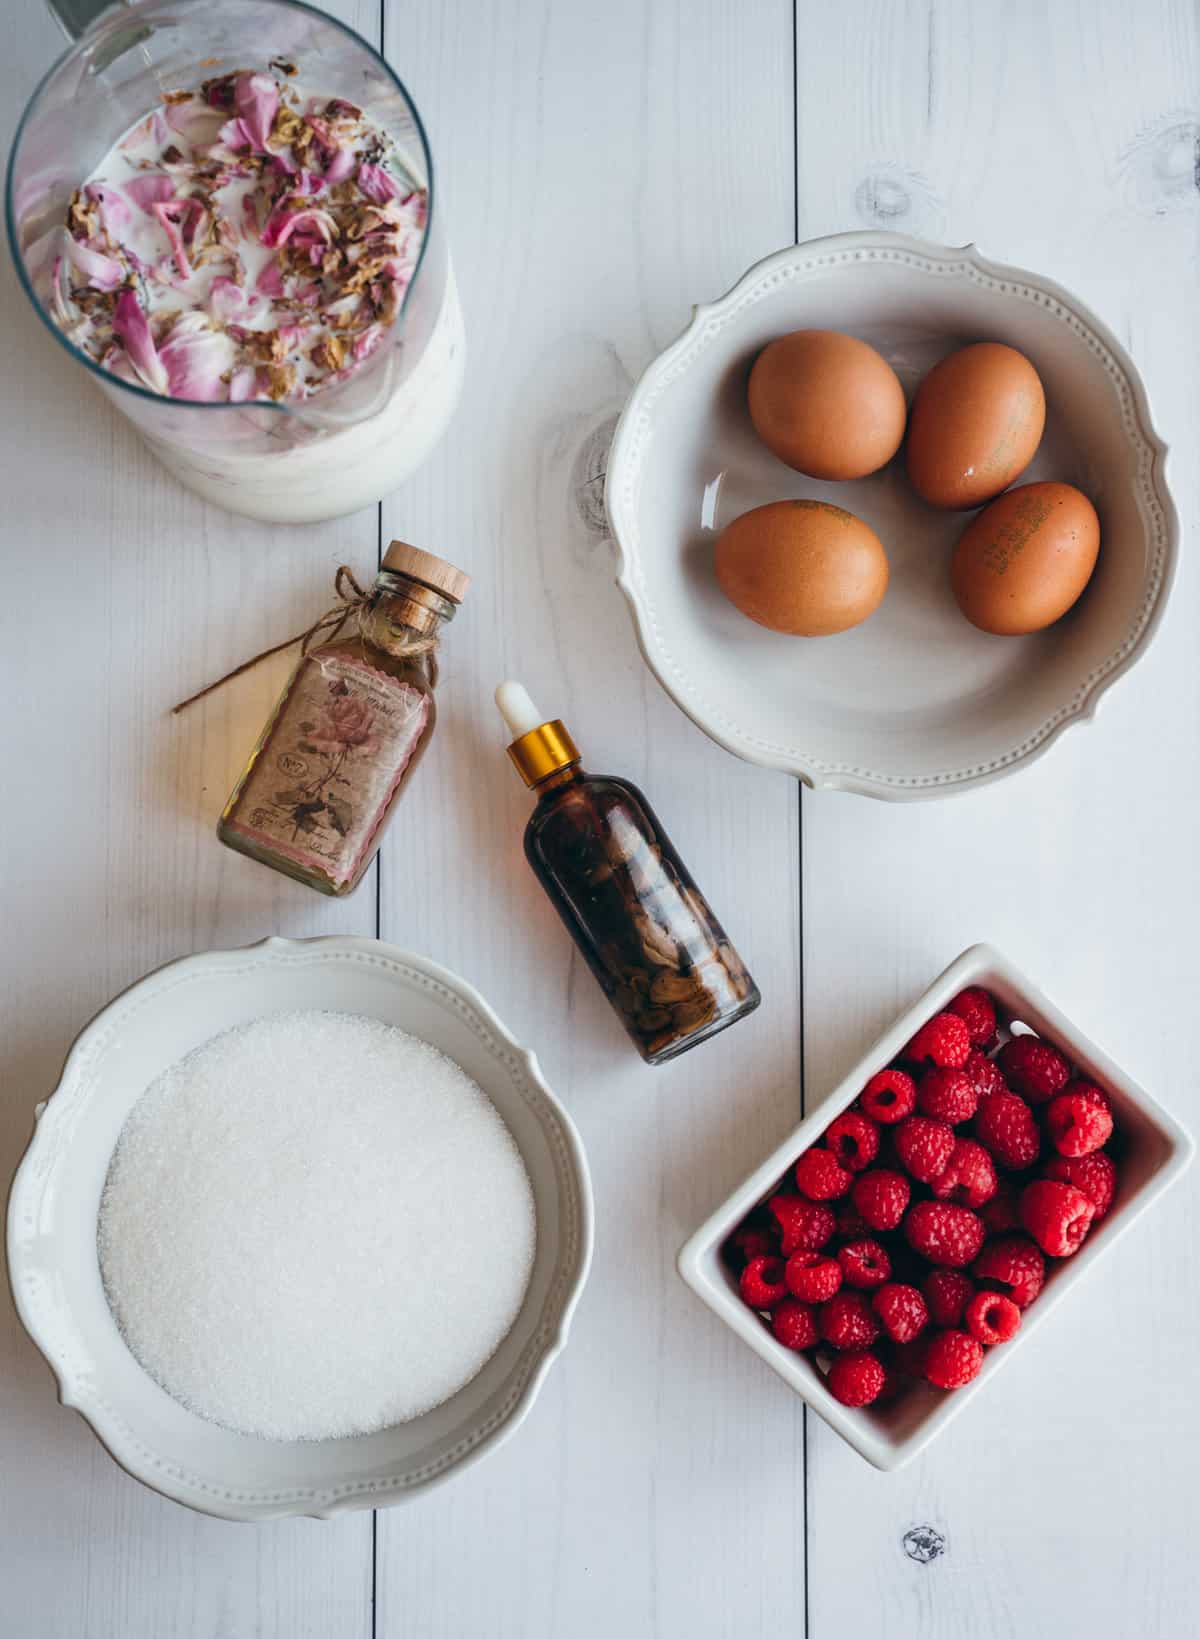 ingredients for rose ice cream including small doppler bottle of vanilla extract, a white bowl of sugar, a ceramic berry bowl filled with red raspberries, a white bowl with brown eggs and rose infused milk on a white rustic surface